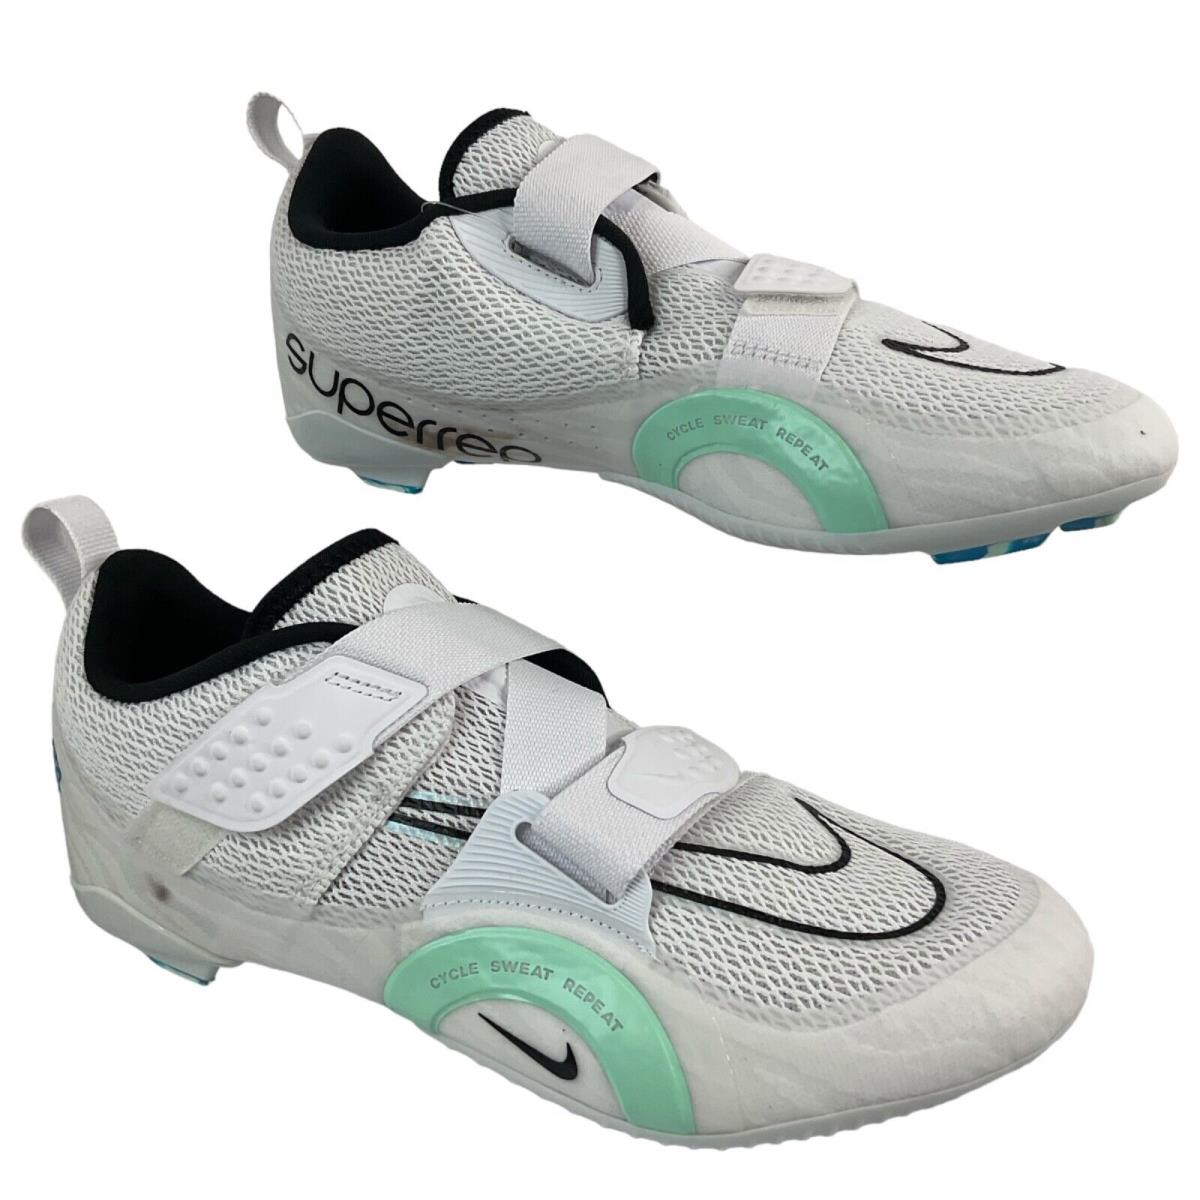 Nike Cycling Shoes Women Sz 10 Superrep Cycle 2 NN White Indoor DH3395 100